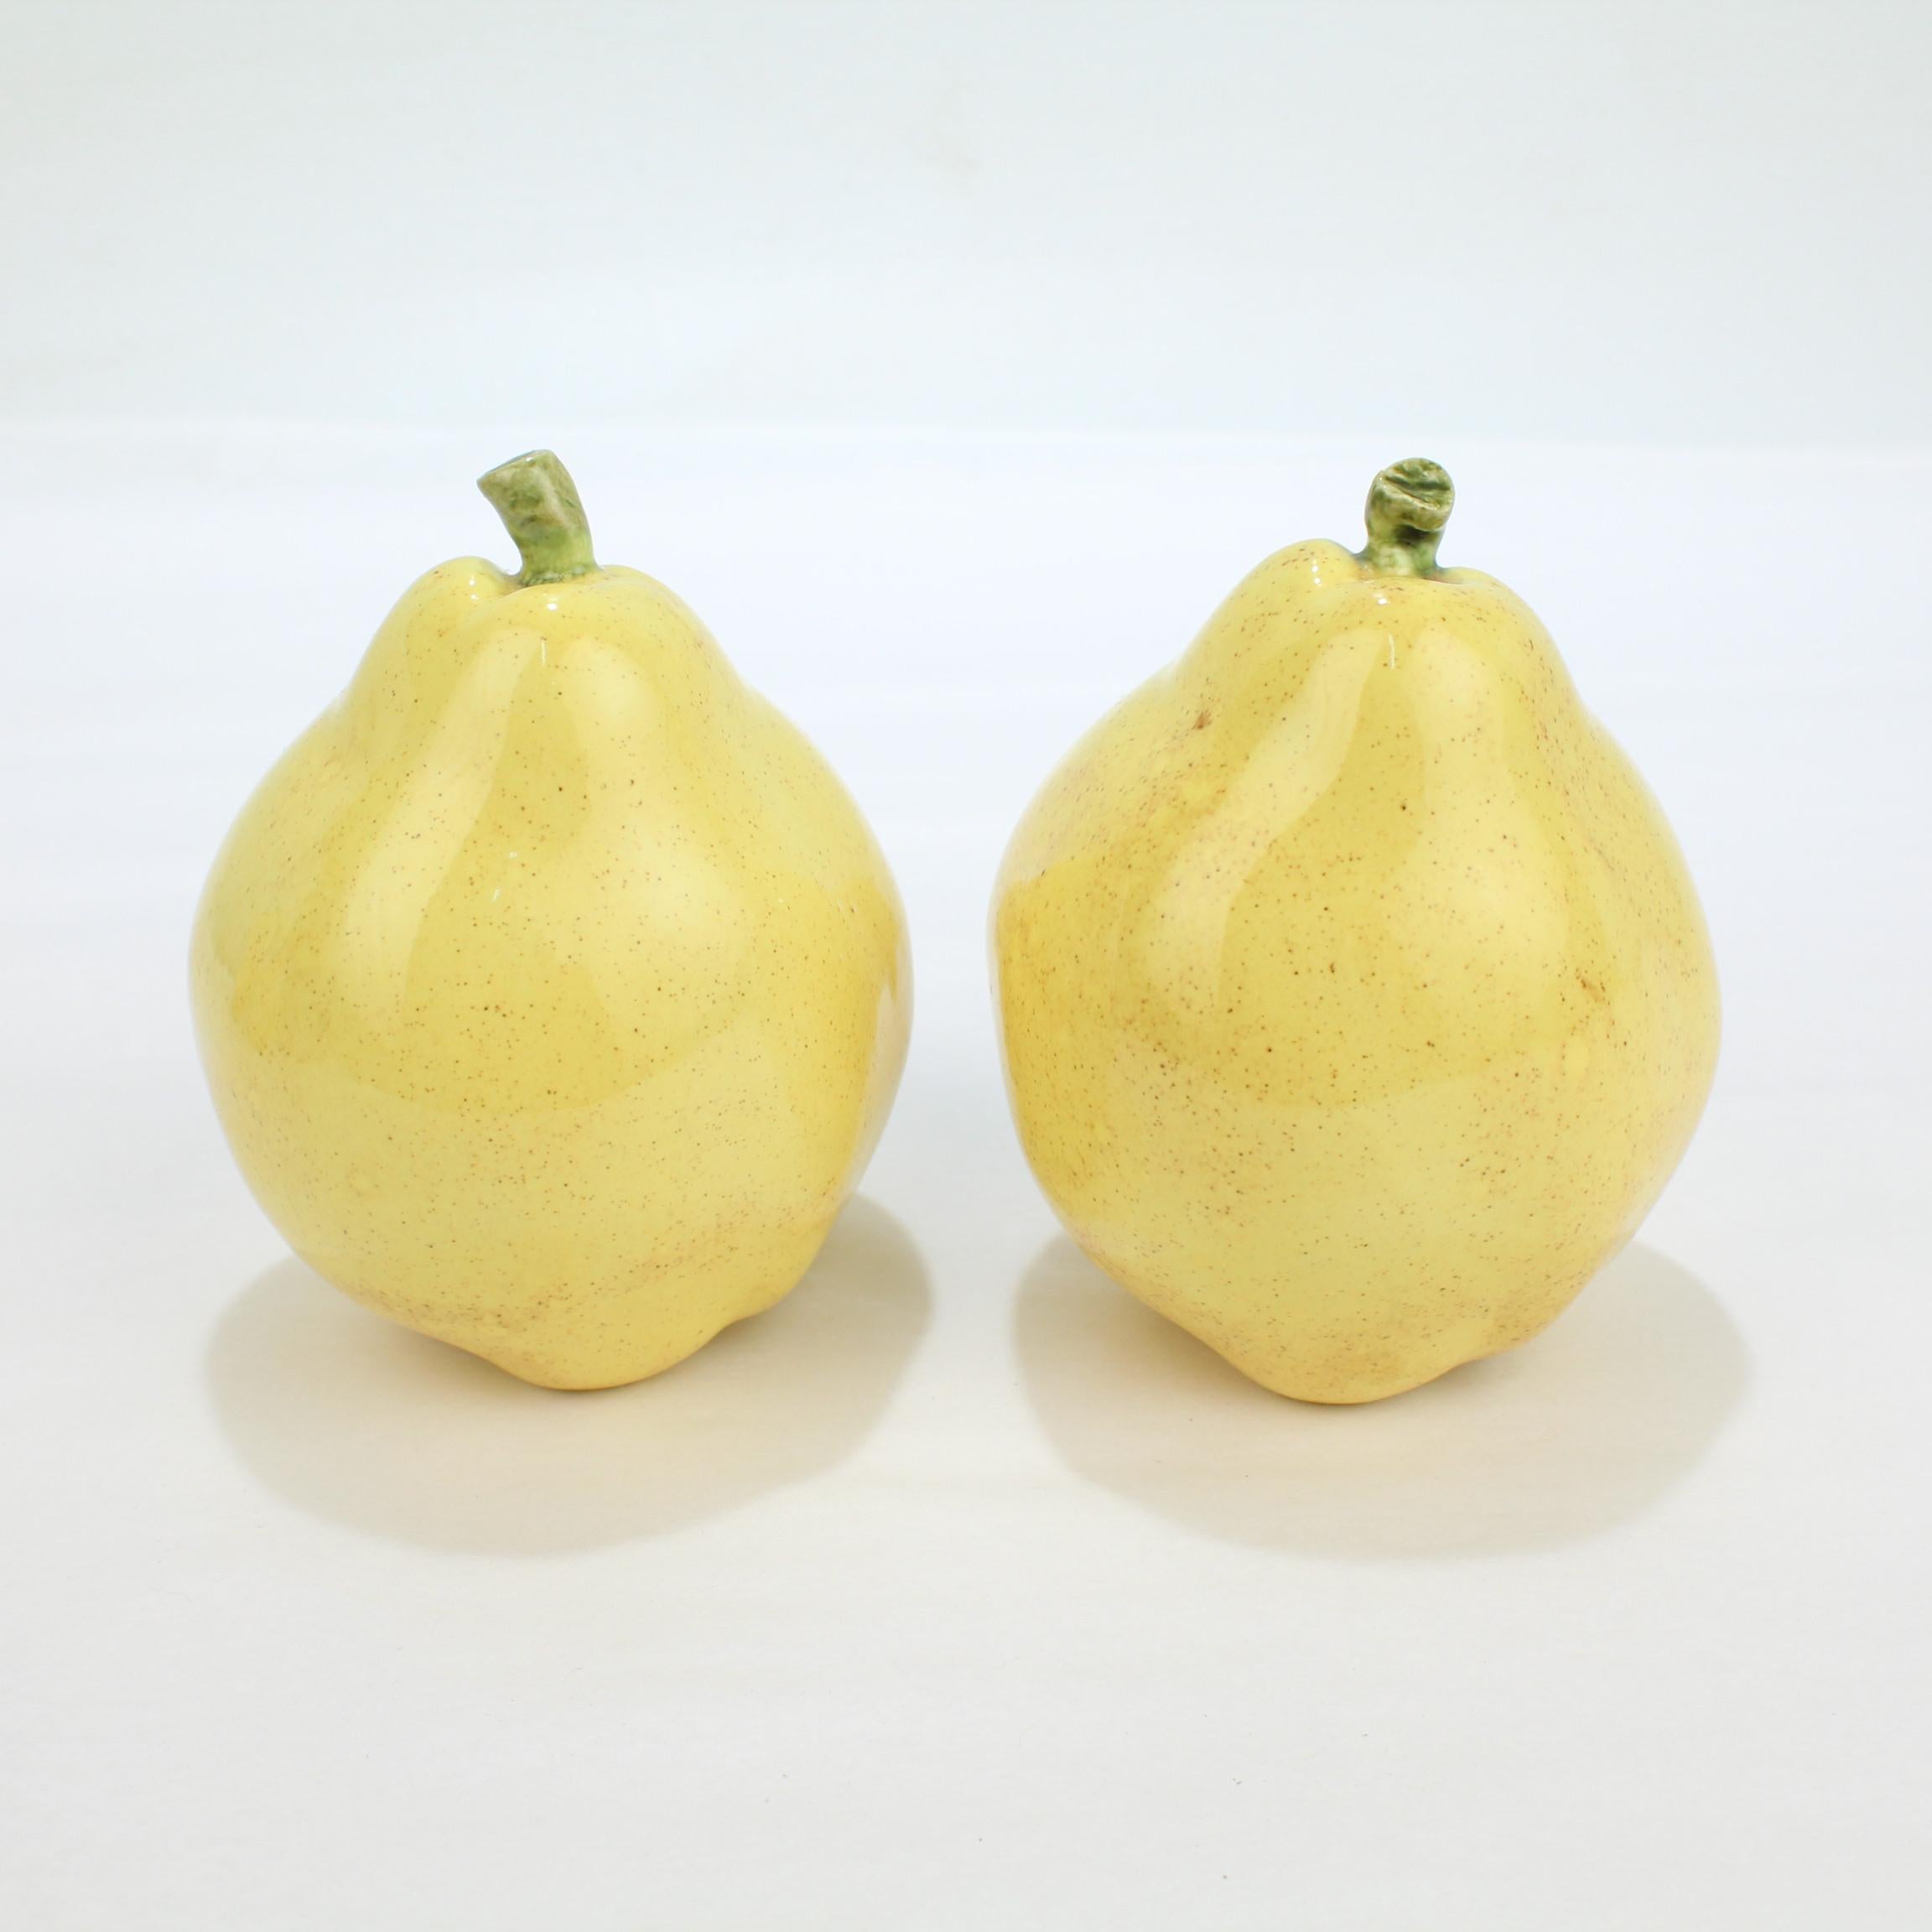 2 Pairs of Pear Shaped Yellow Pottery Salt and Pepper Shakers For Sale 5